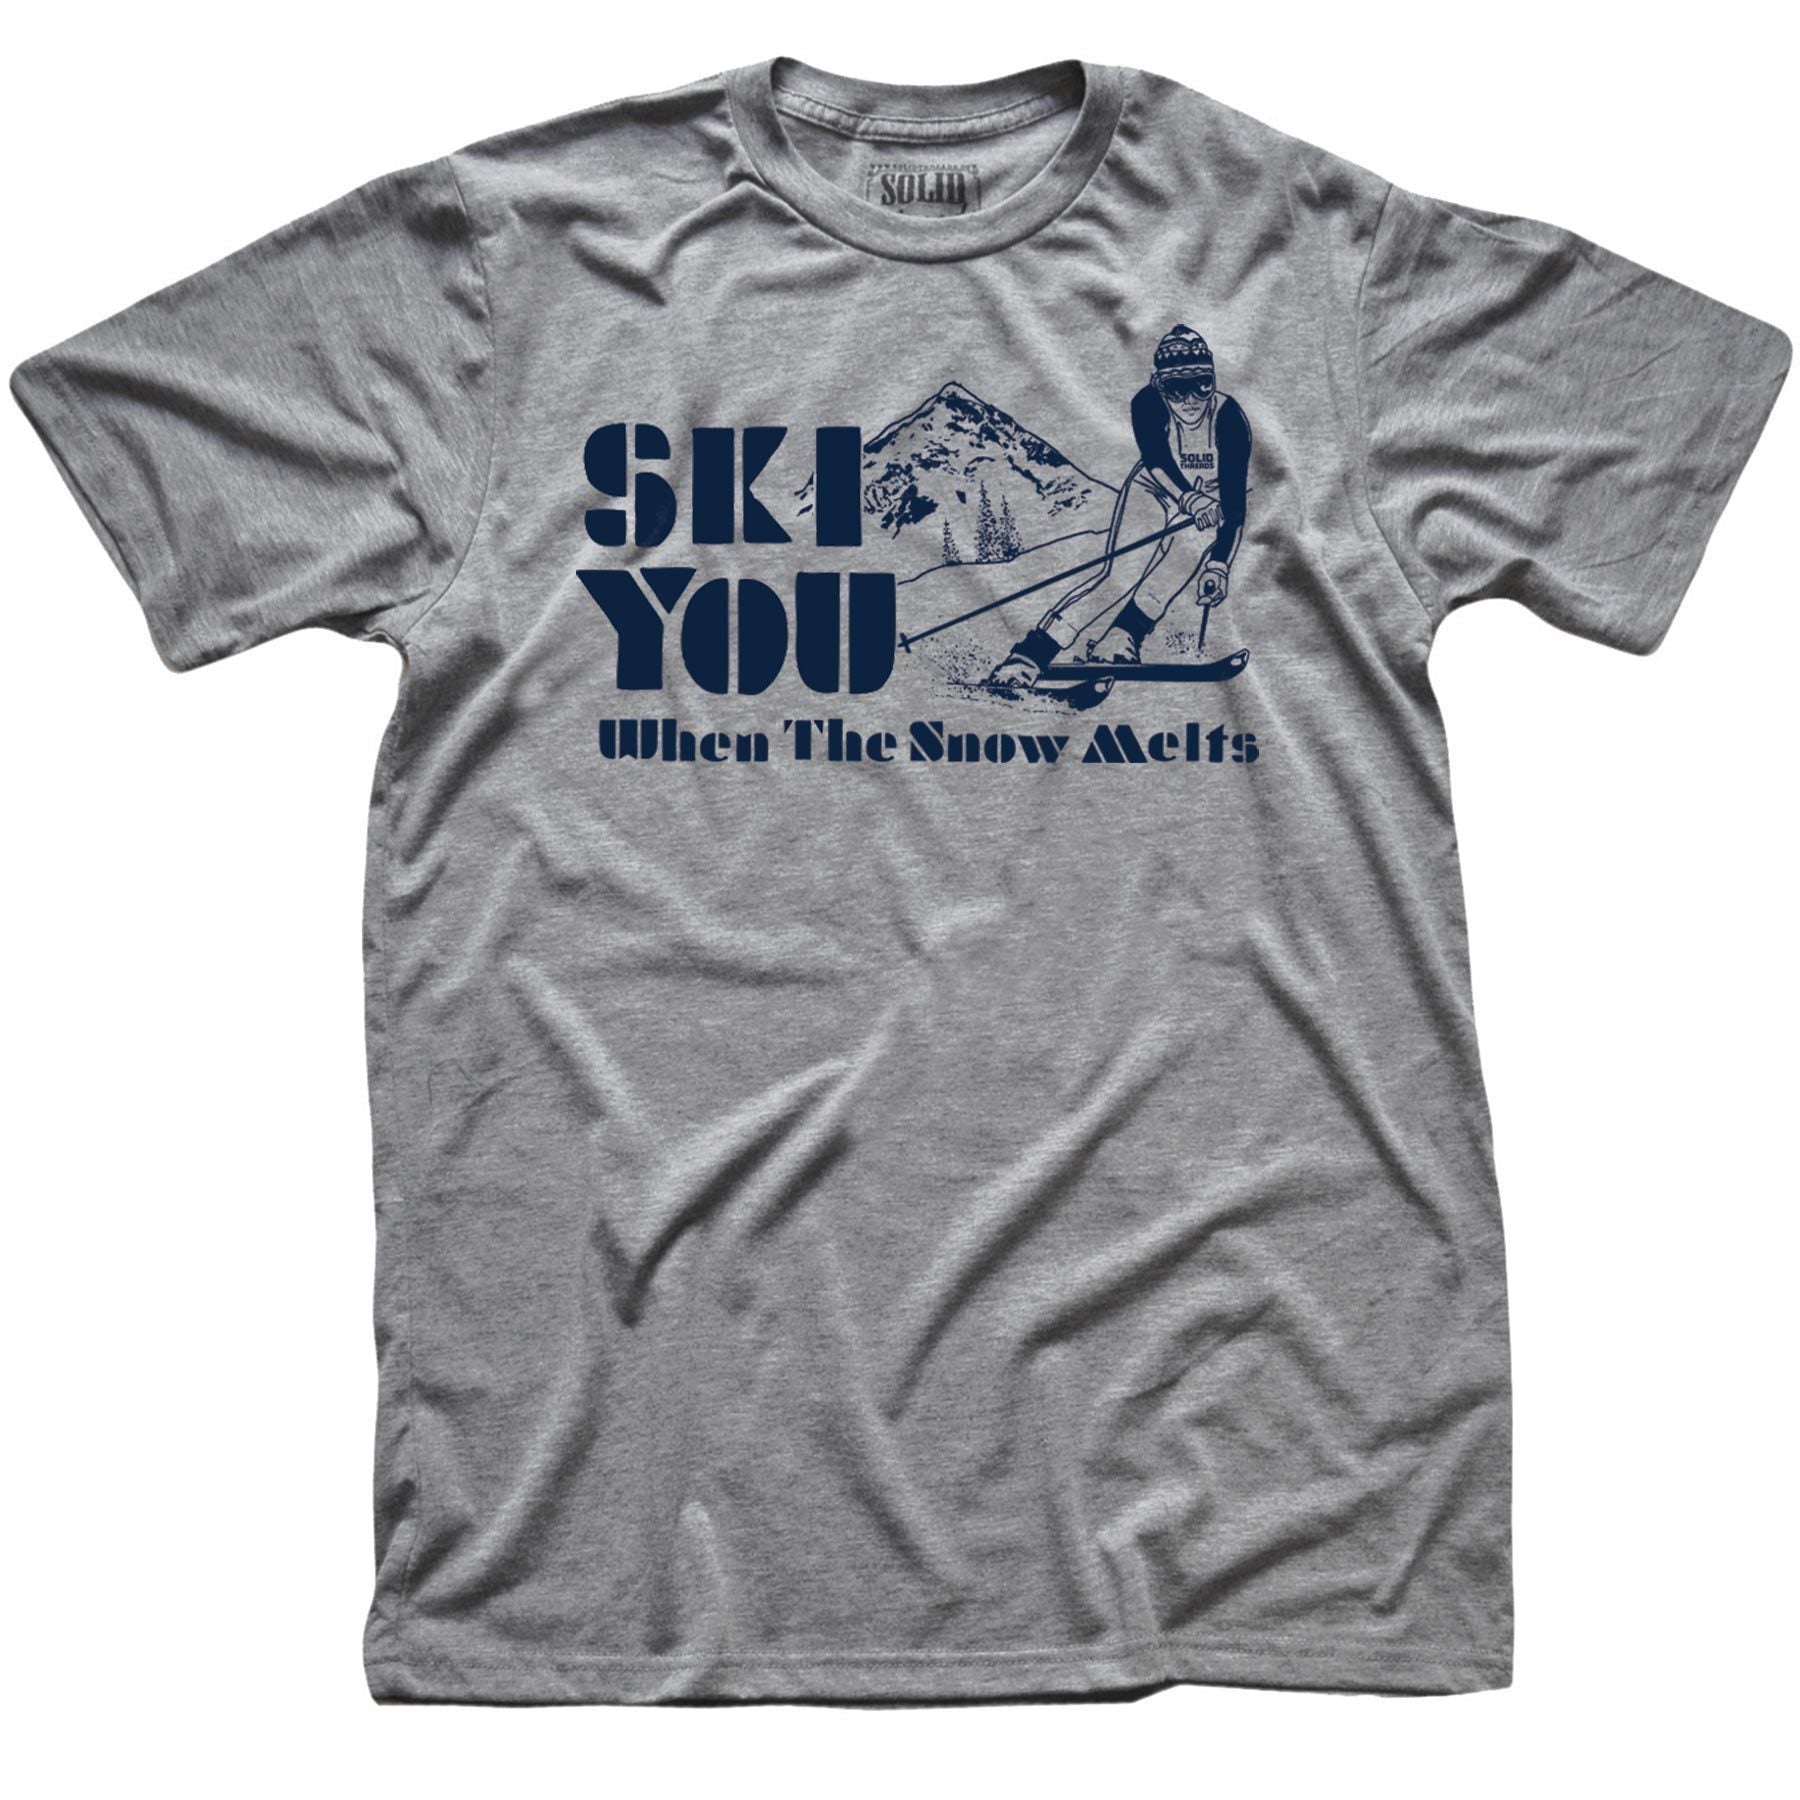 Ski You When The Snow Melts Vintage Inspired T-shirt | SOLID THREADS